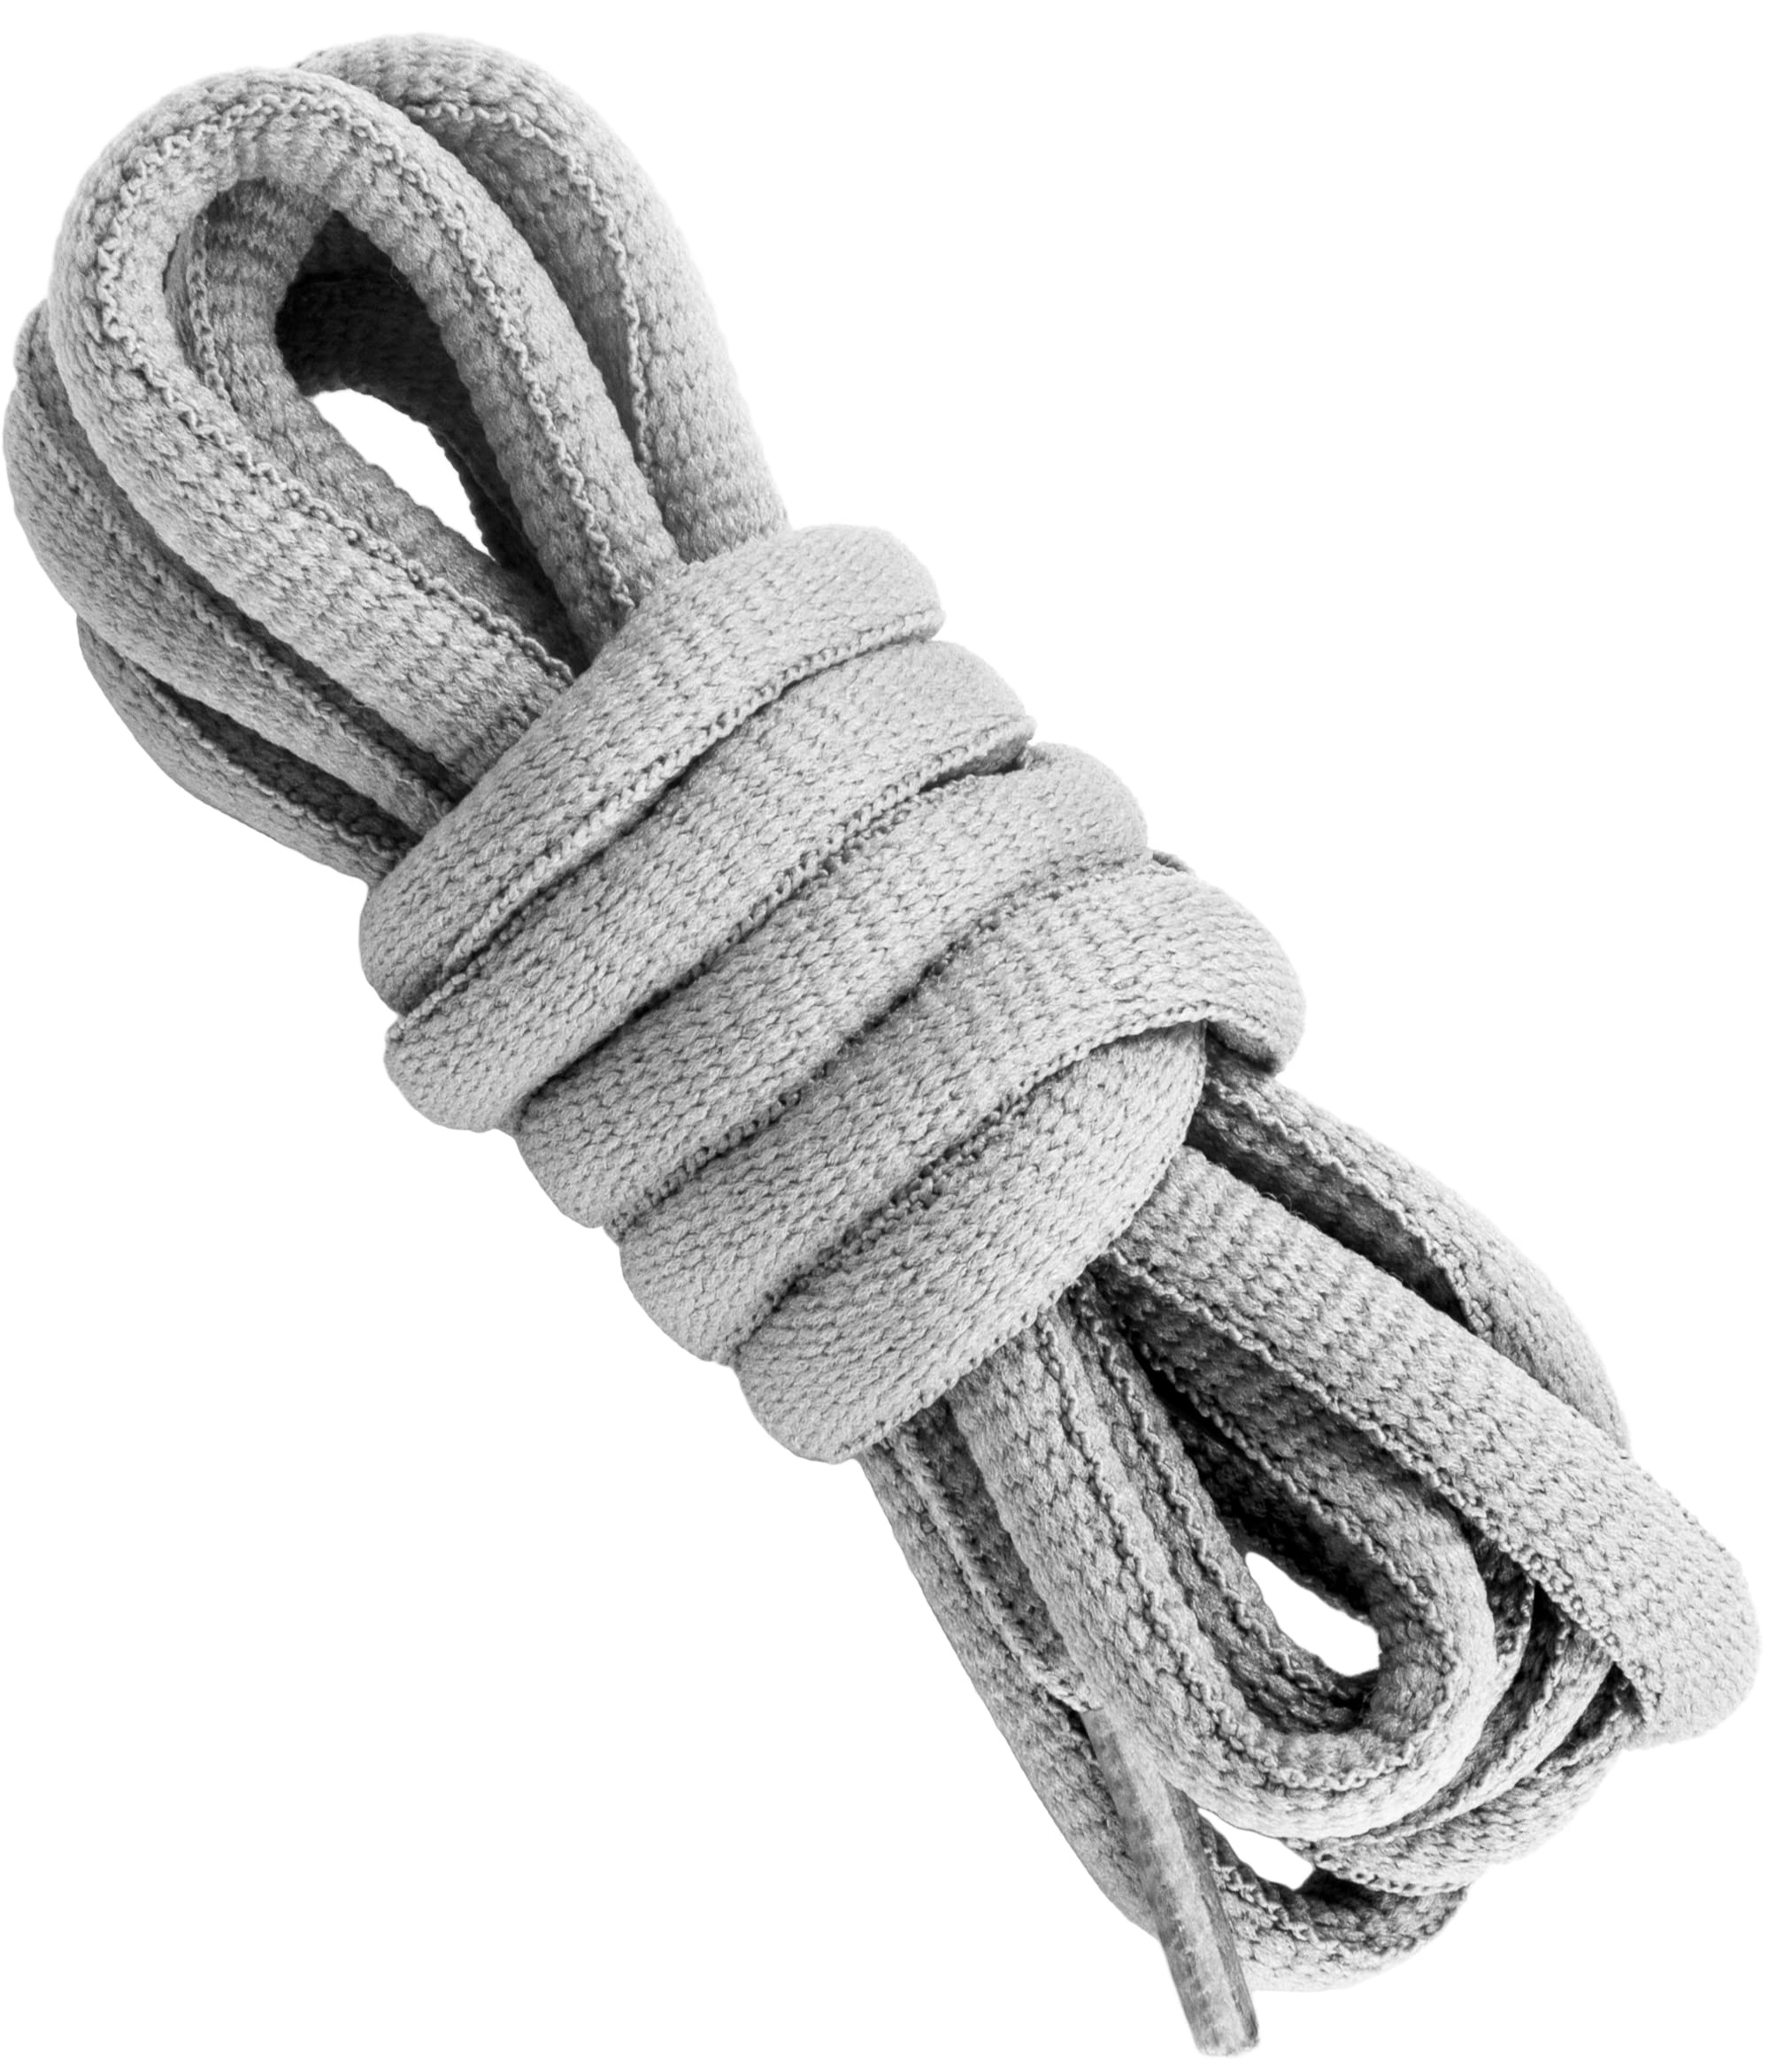 Tolumo Diameter 9 MM Round Durable Boot Laces Lengths 140 to 180 CM Shoelaces for Work and Leisure Boots, Hiking Shoes Light Grey 140 CM 1 Pair - 140cm - 1 Pair